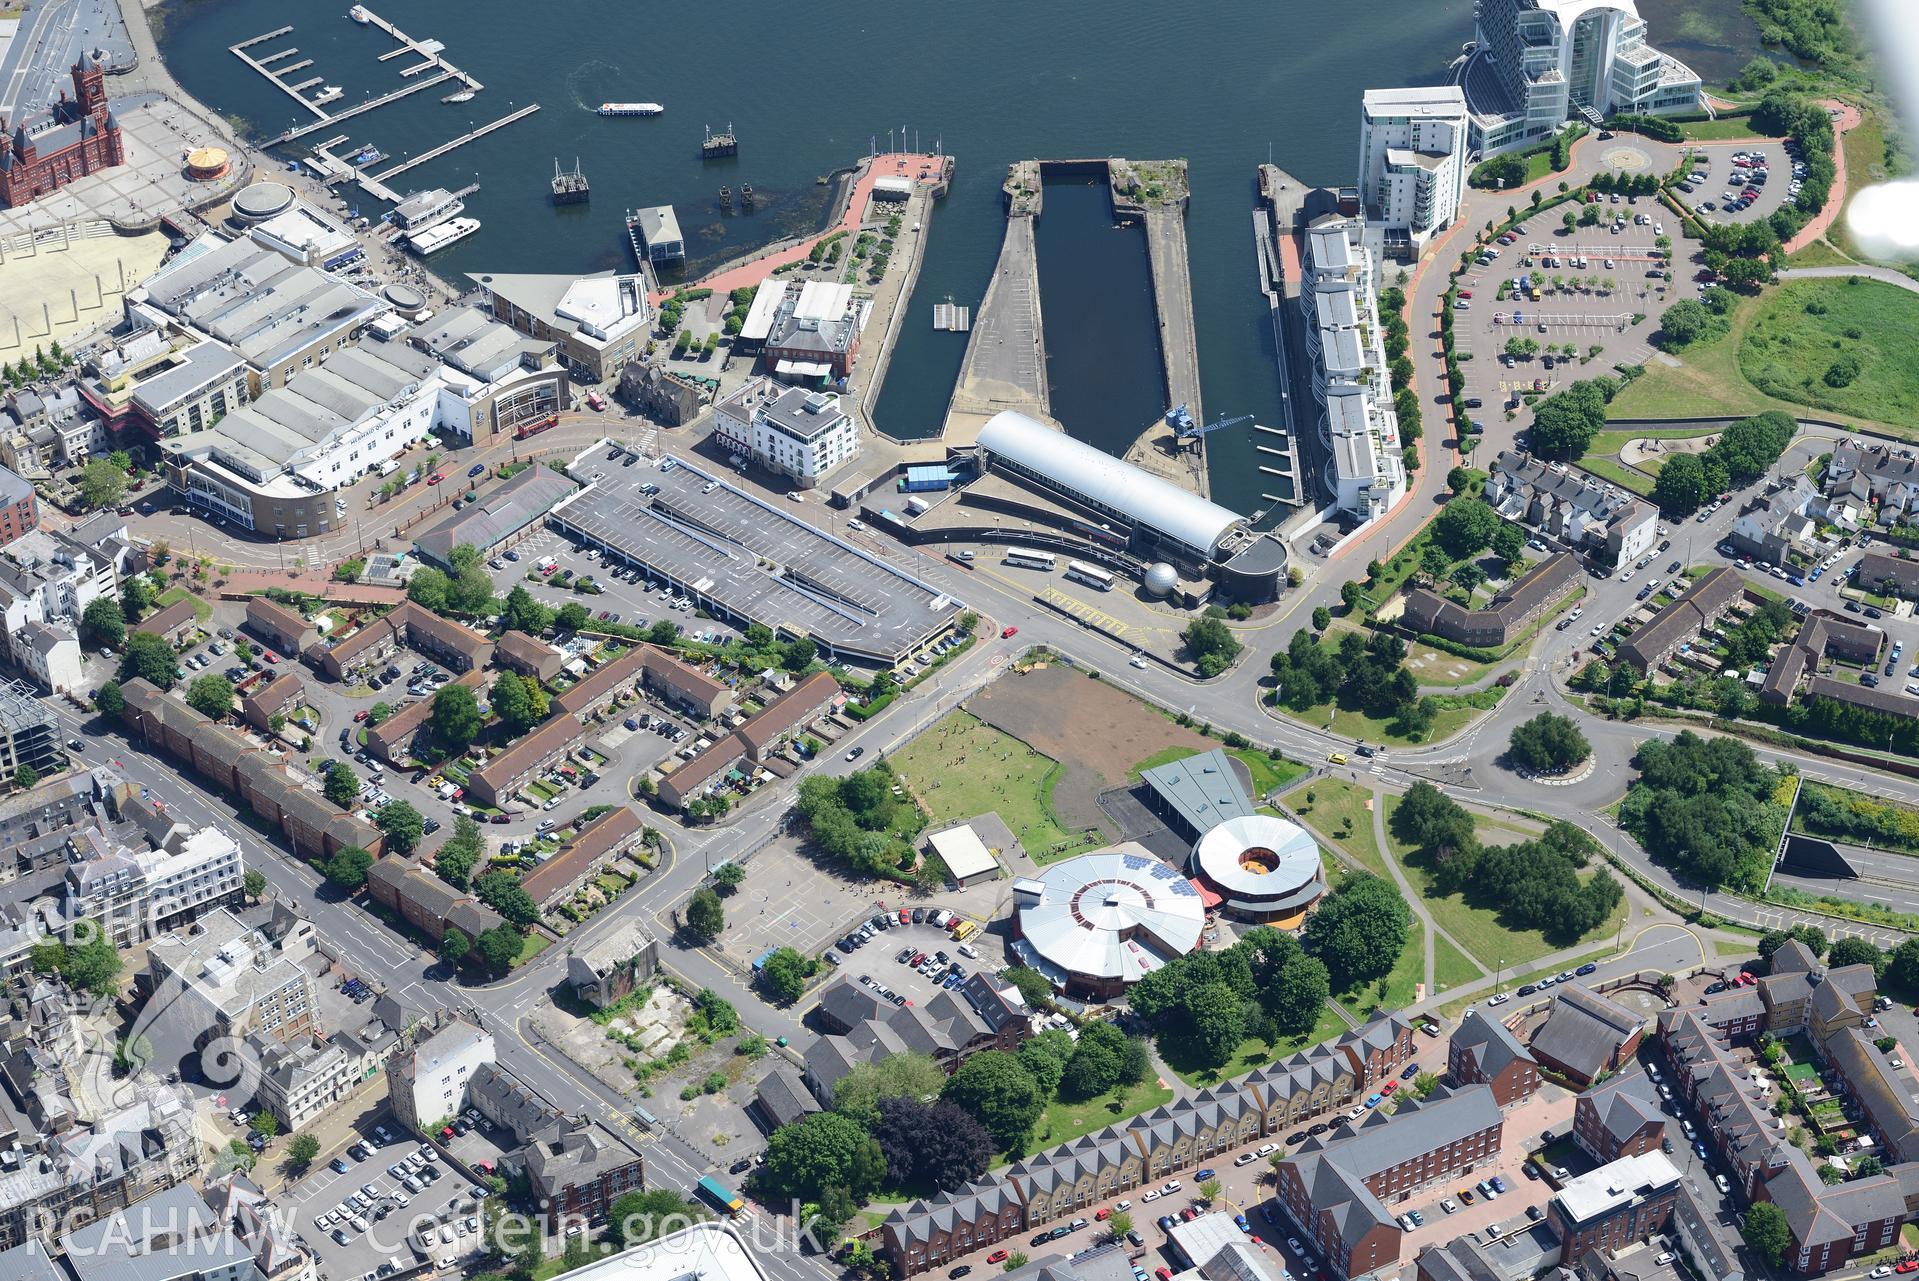 Mountstuart Primary School, Techniquest and St. David's Hotel, Butetown, Cardiff Bay. Oblique aerial photograph taken during the Royal Commission's programme of archaeological aerial reconnaissance by Toby Driver on 29th June 2015.